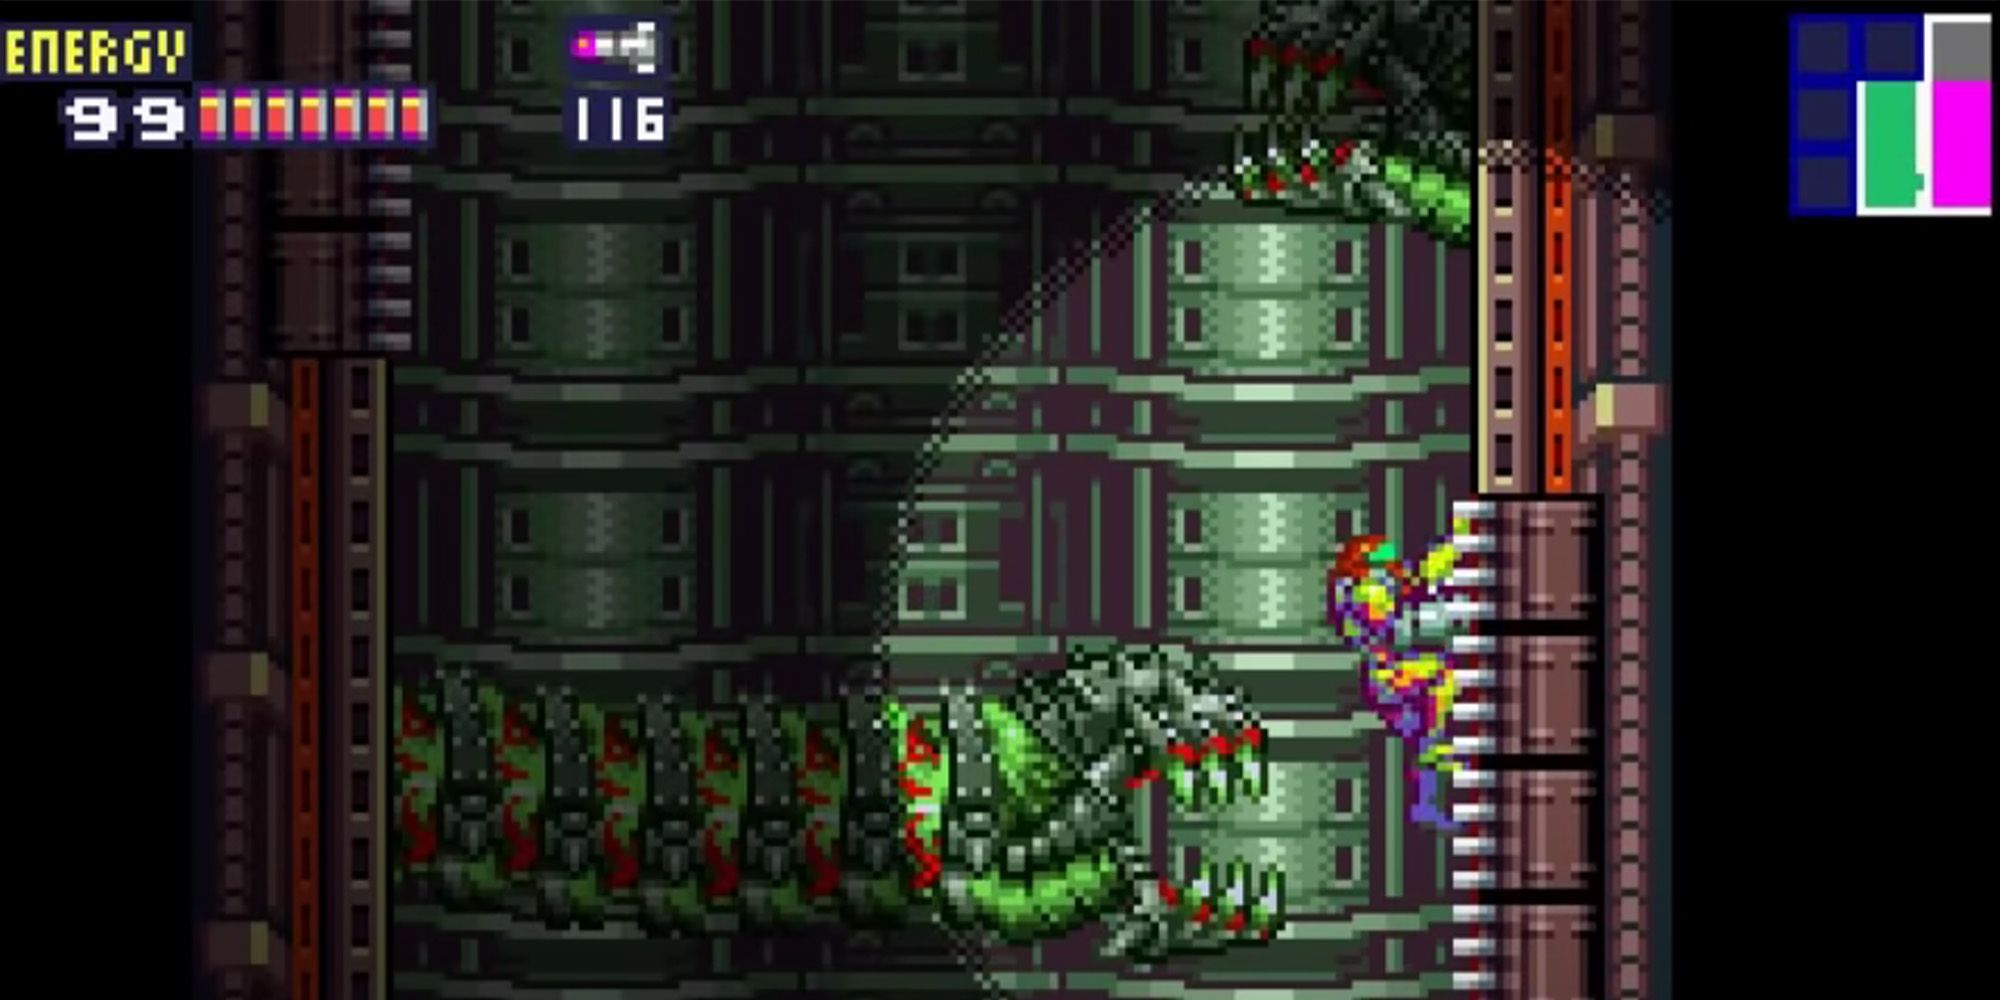 Metriod Fusion on Gameboy Advanced. Samus narrowly avoids being eaten by a giant Worm